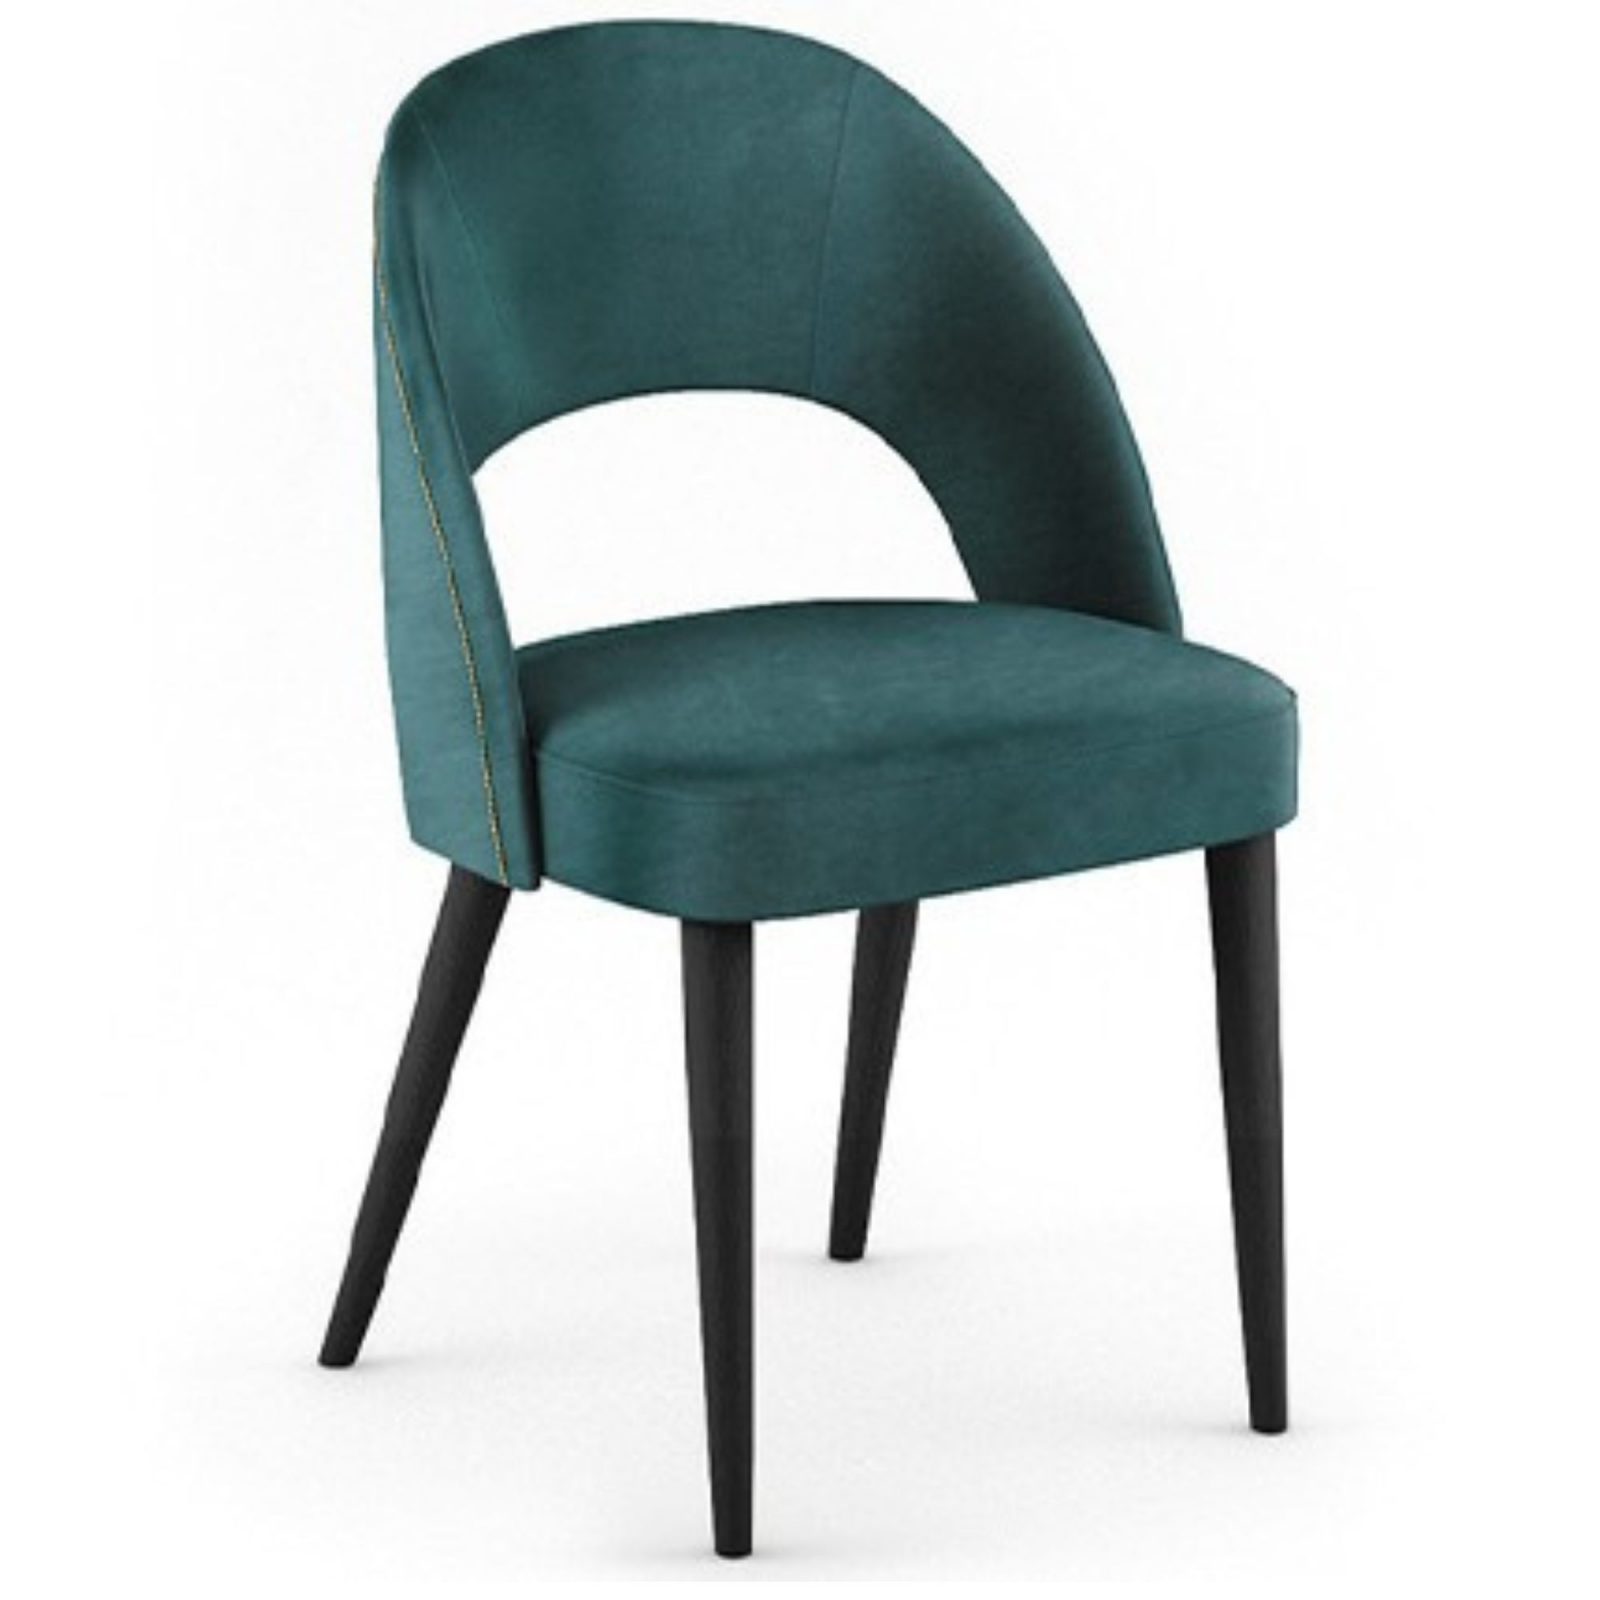 Zola Side Chair